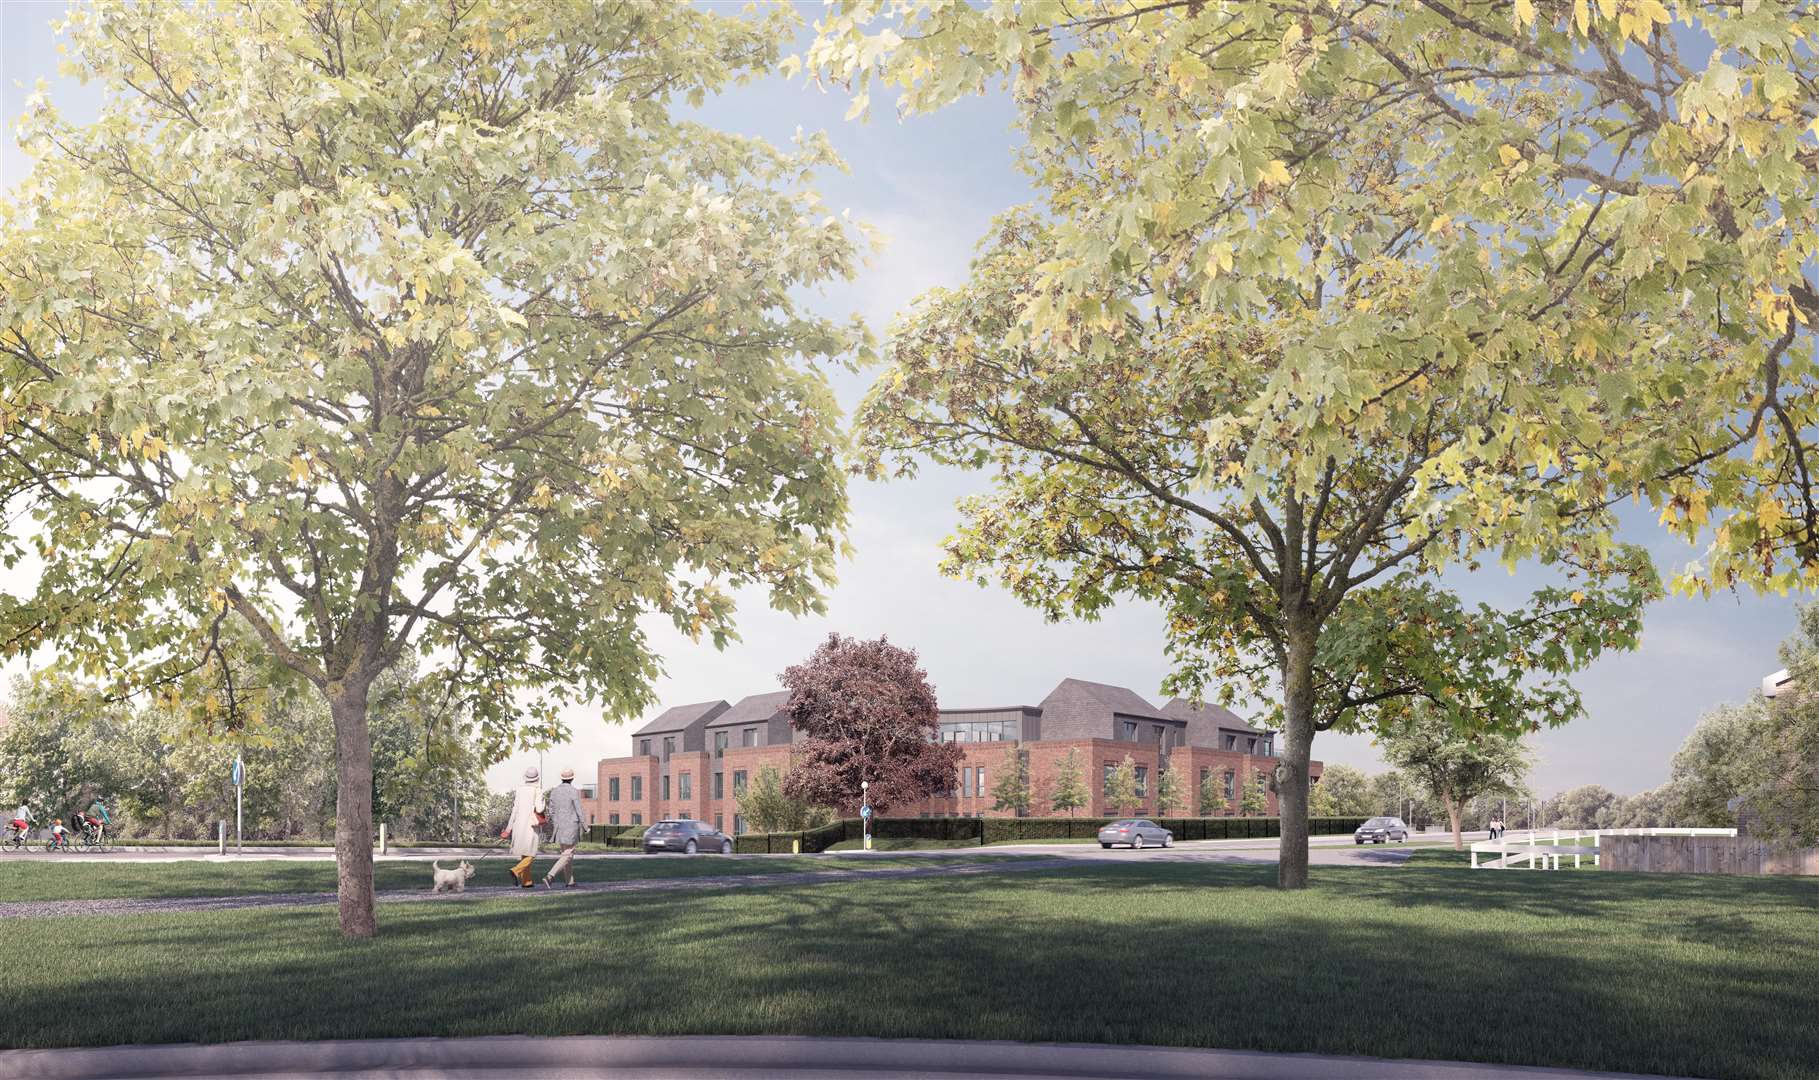 Developers have asked for permission to build the care home featuring 65 bedrooms. Picture: Frontier Estates